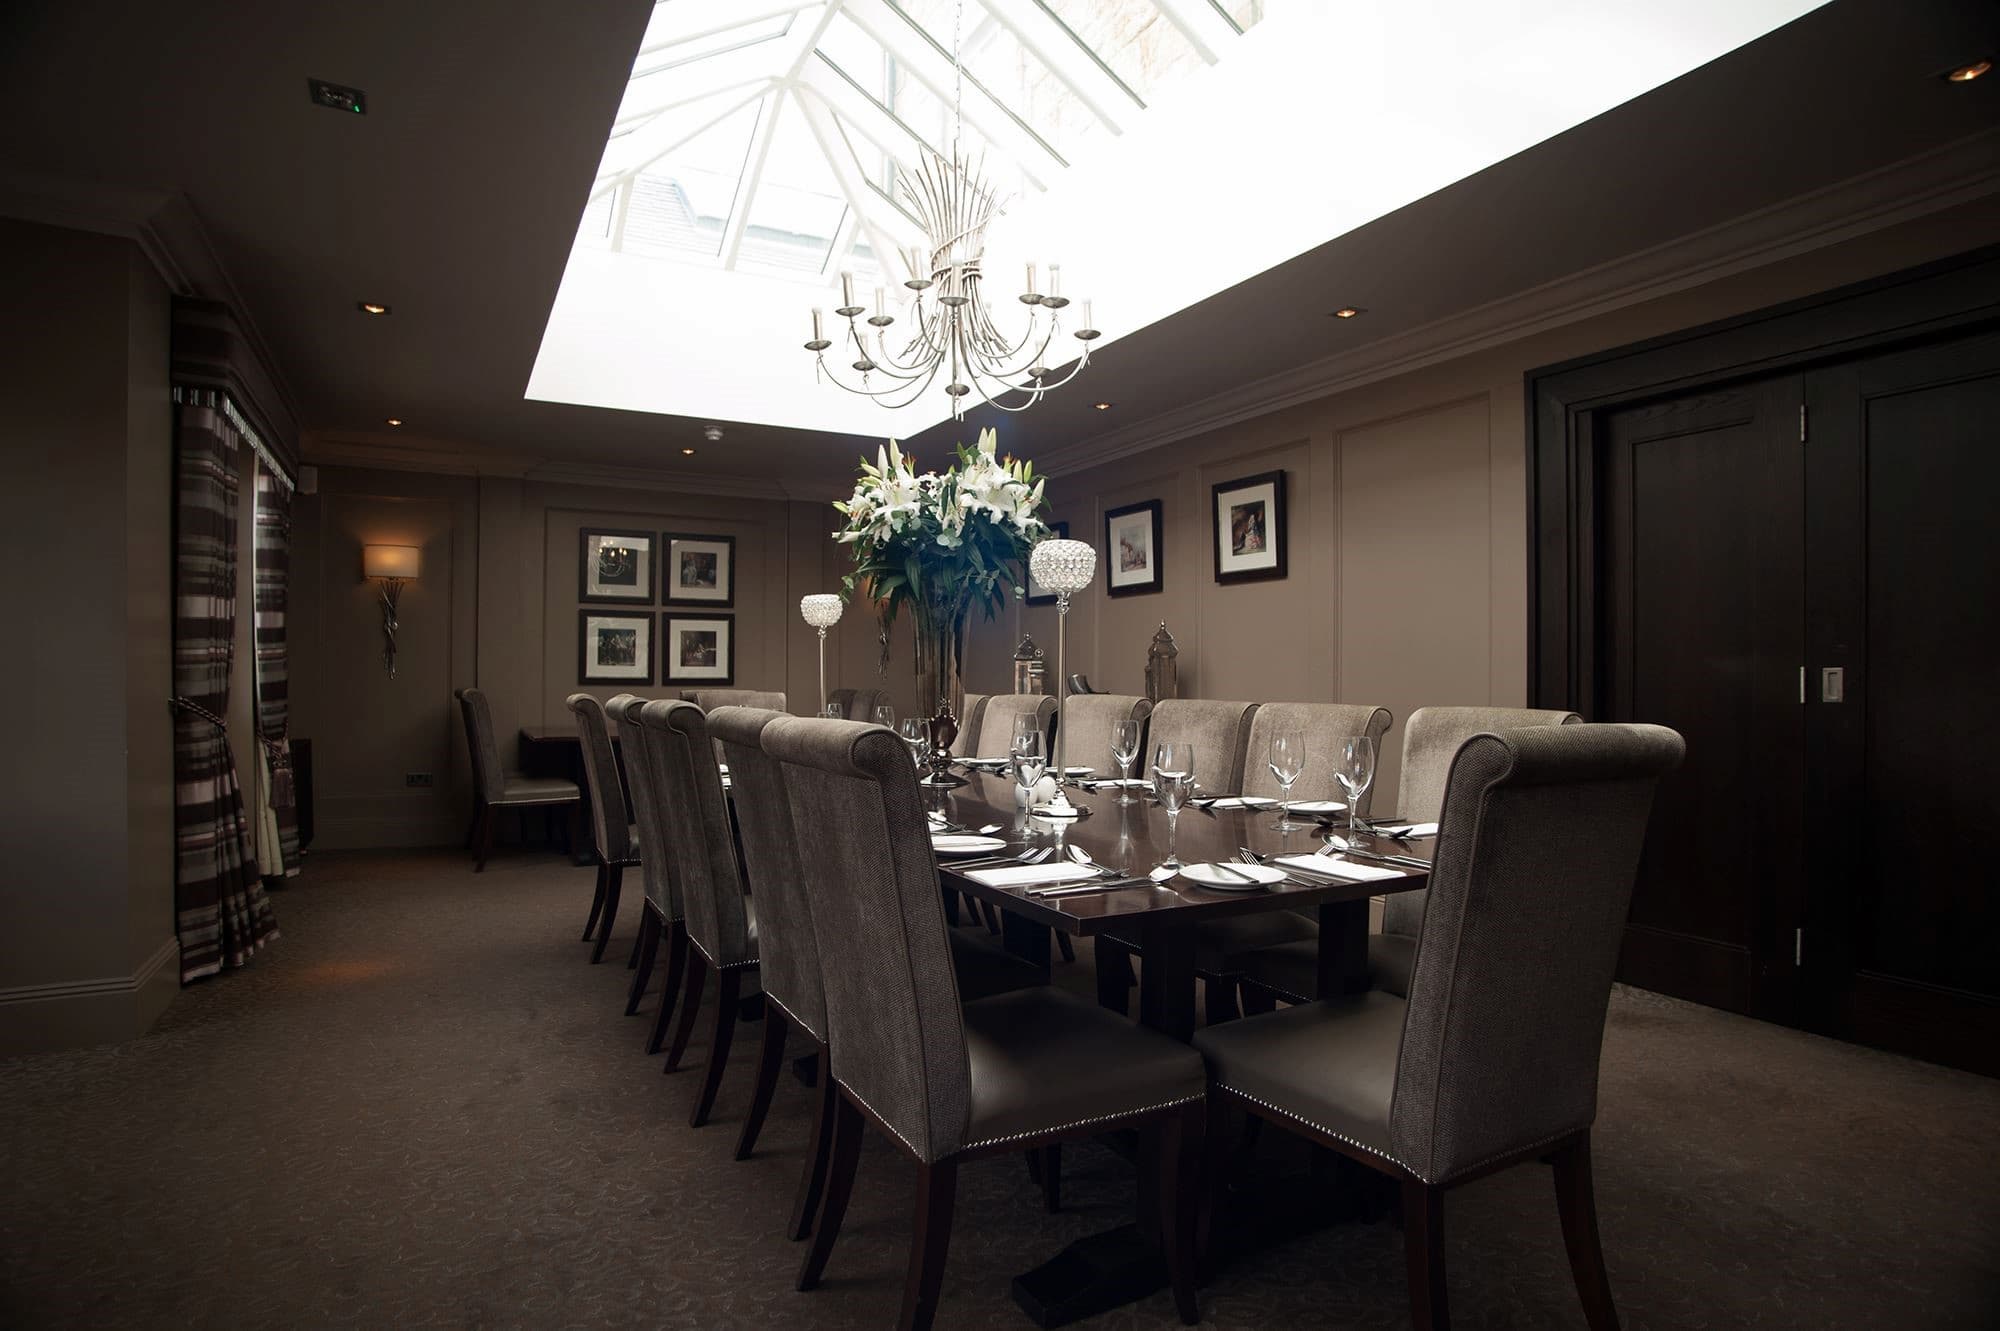 Private dining area at the Dumfries Arms